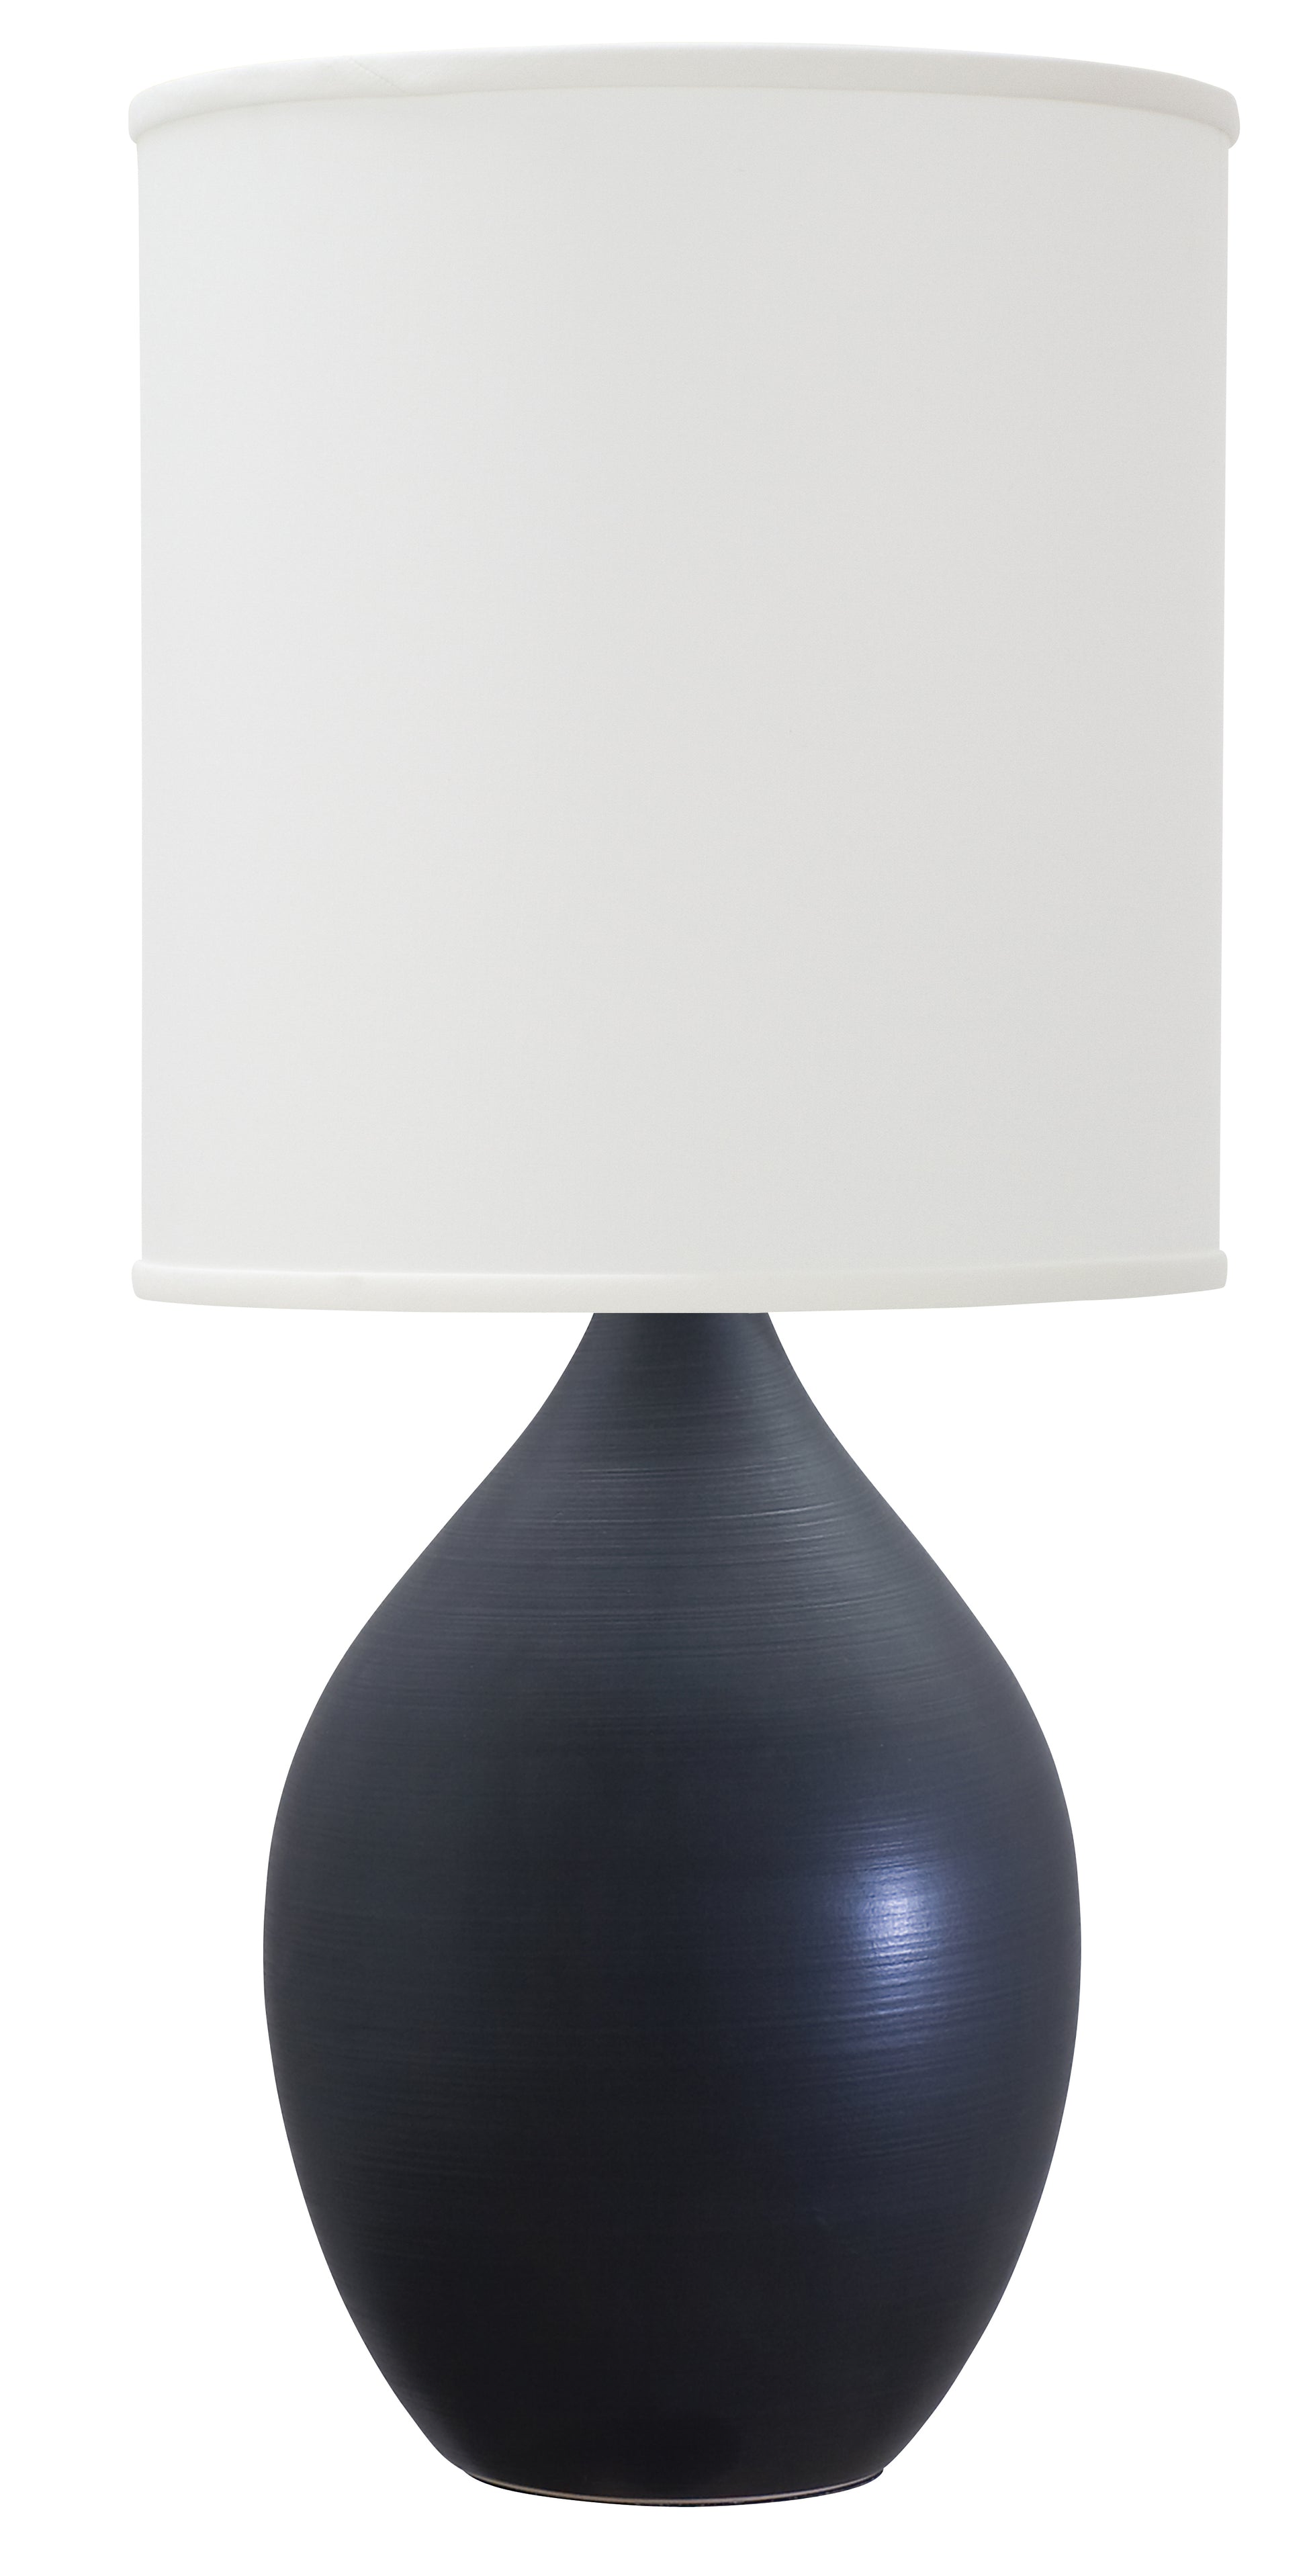 House of Troy Scatchard 24" Stoneware Table Lamp in Black Matte GS301-BM